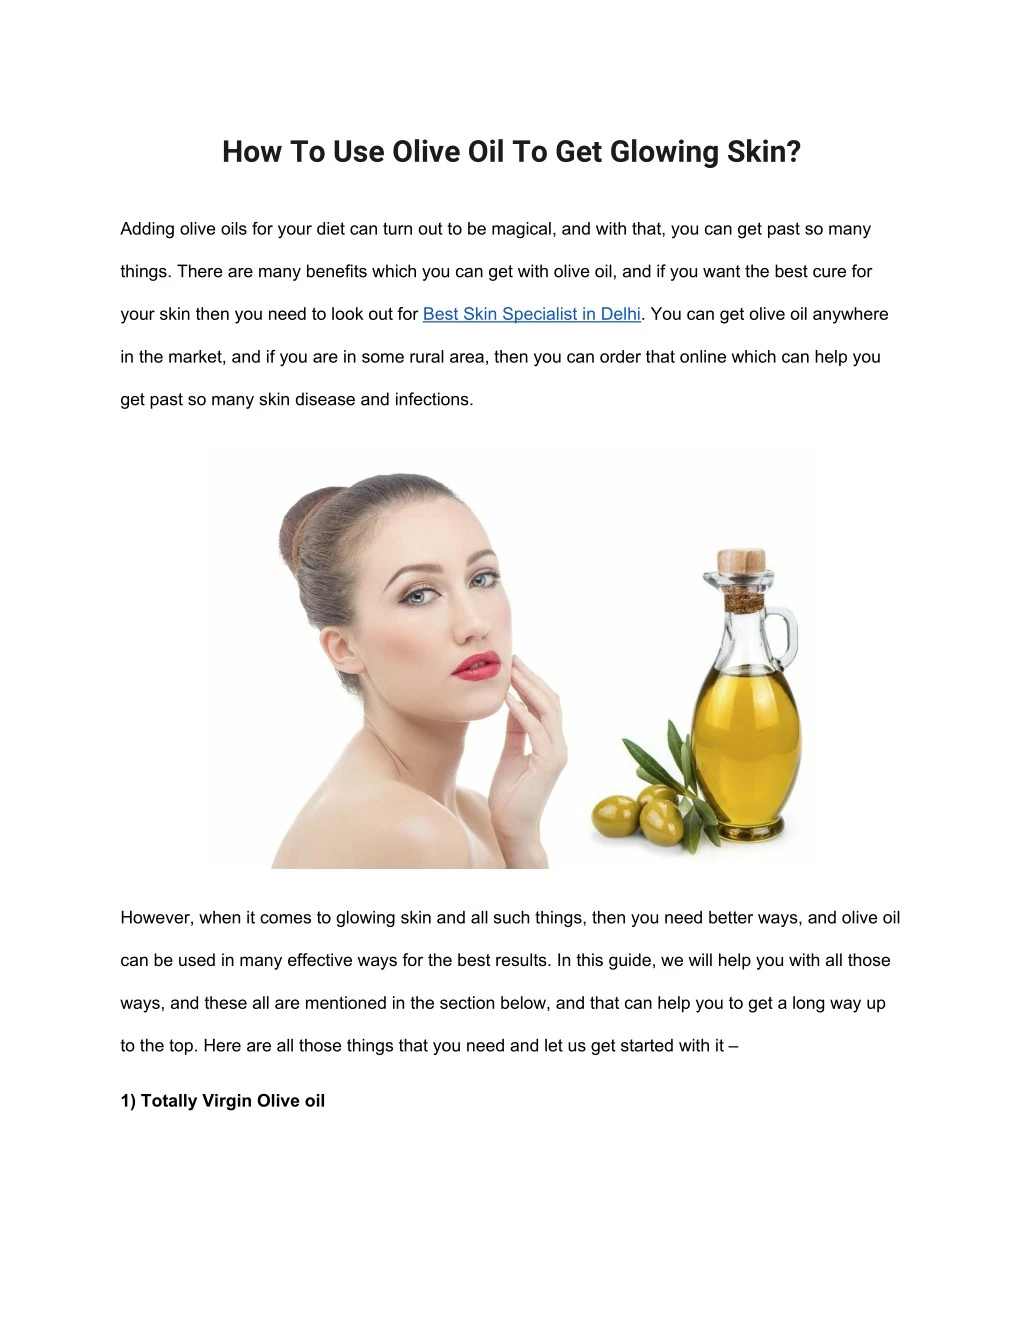 how to use olive oil to get glowing skin